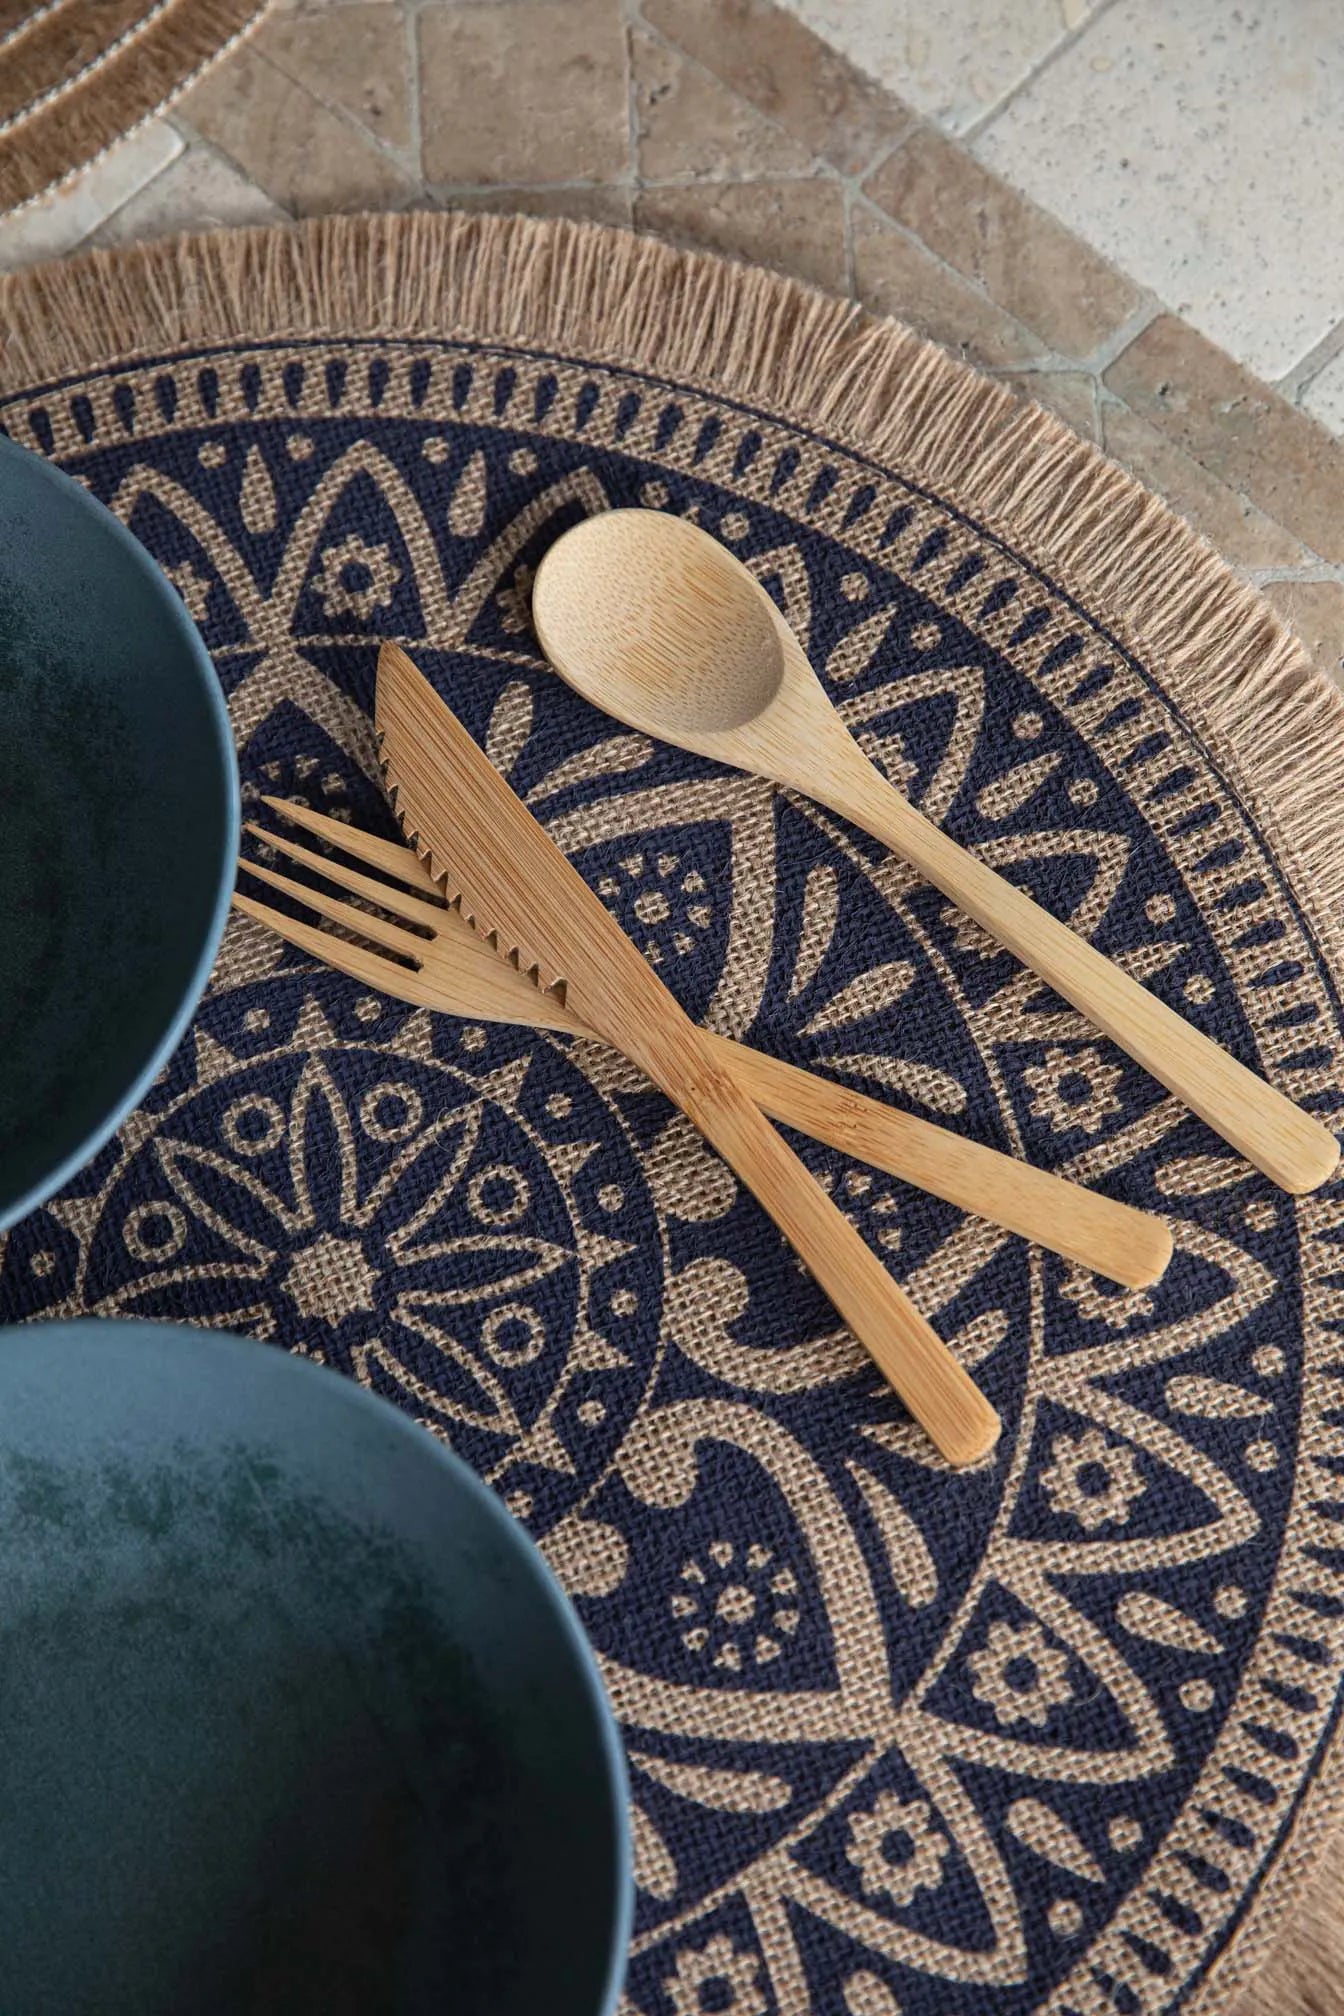 Set of 4 Jute Placemats with Mandala Design, Natural Printed Hessian Round Table Mats, 41cm